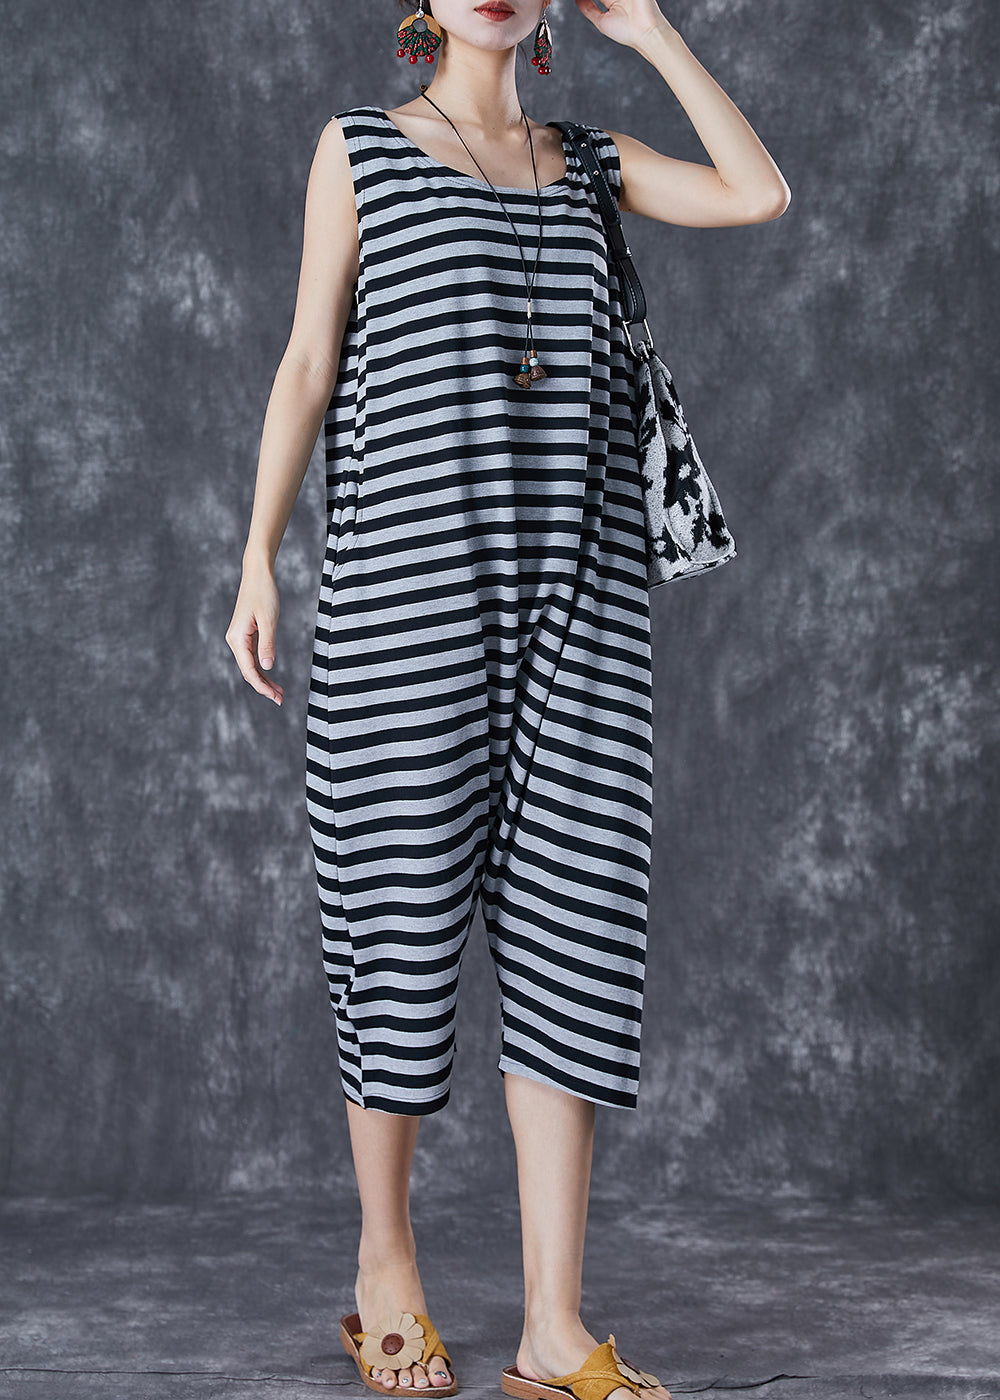 Modern Grey O-Neck Striped Cotton Overalls Jumpsuit Sleeveless LY7096